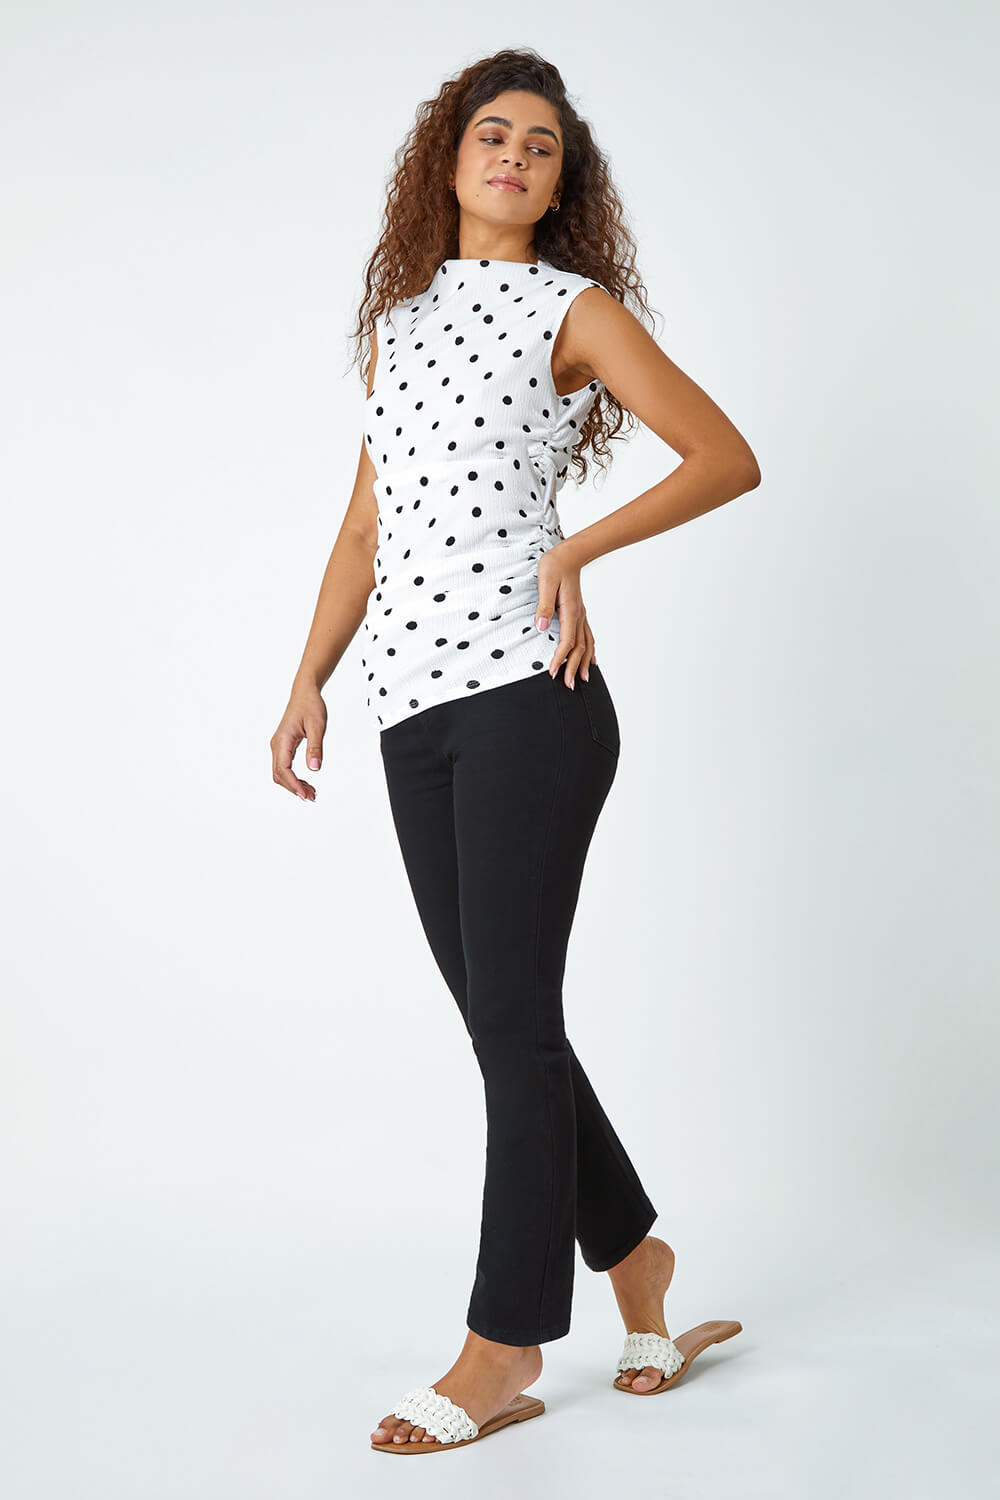 Black Polka Dot Ruched Stretch Top, Image 2 of 5